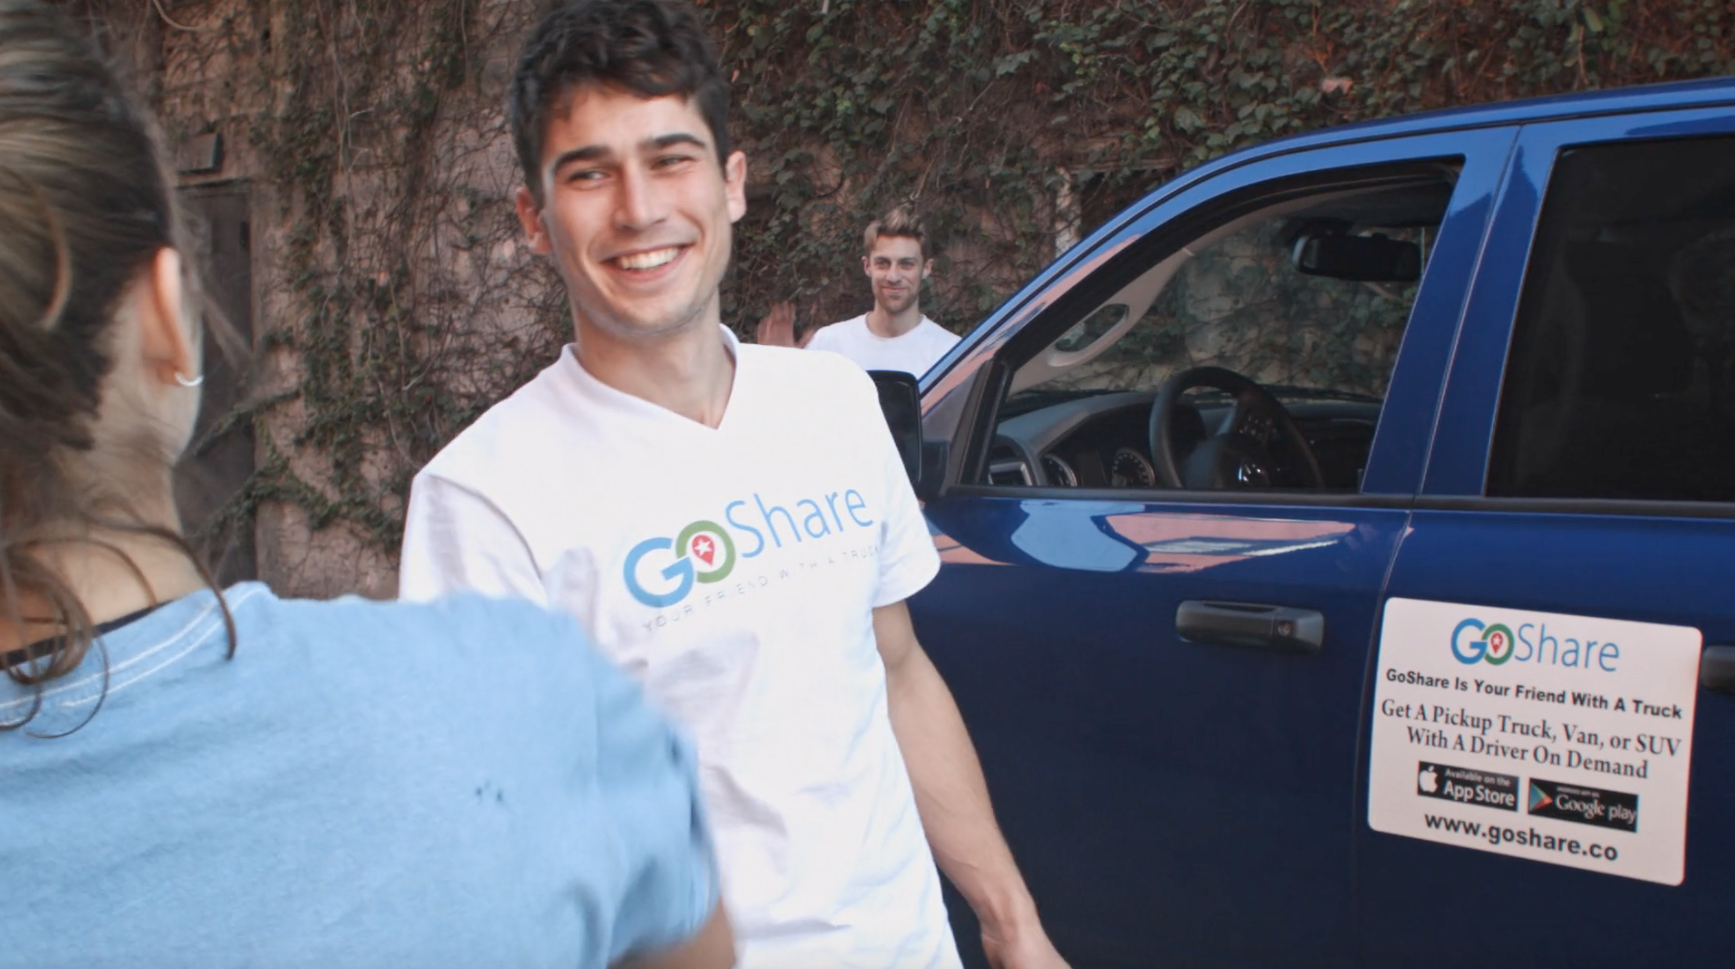 GoShare enables people to rent trucks for hauling large items.